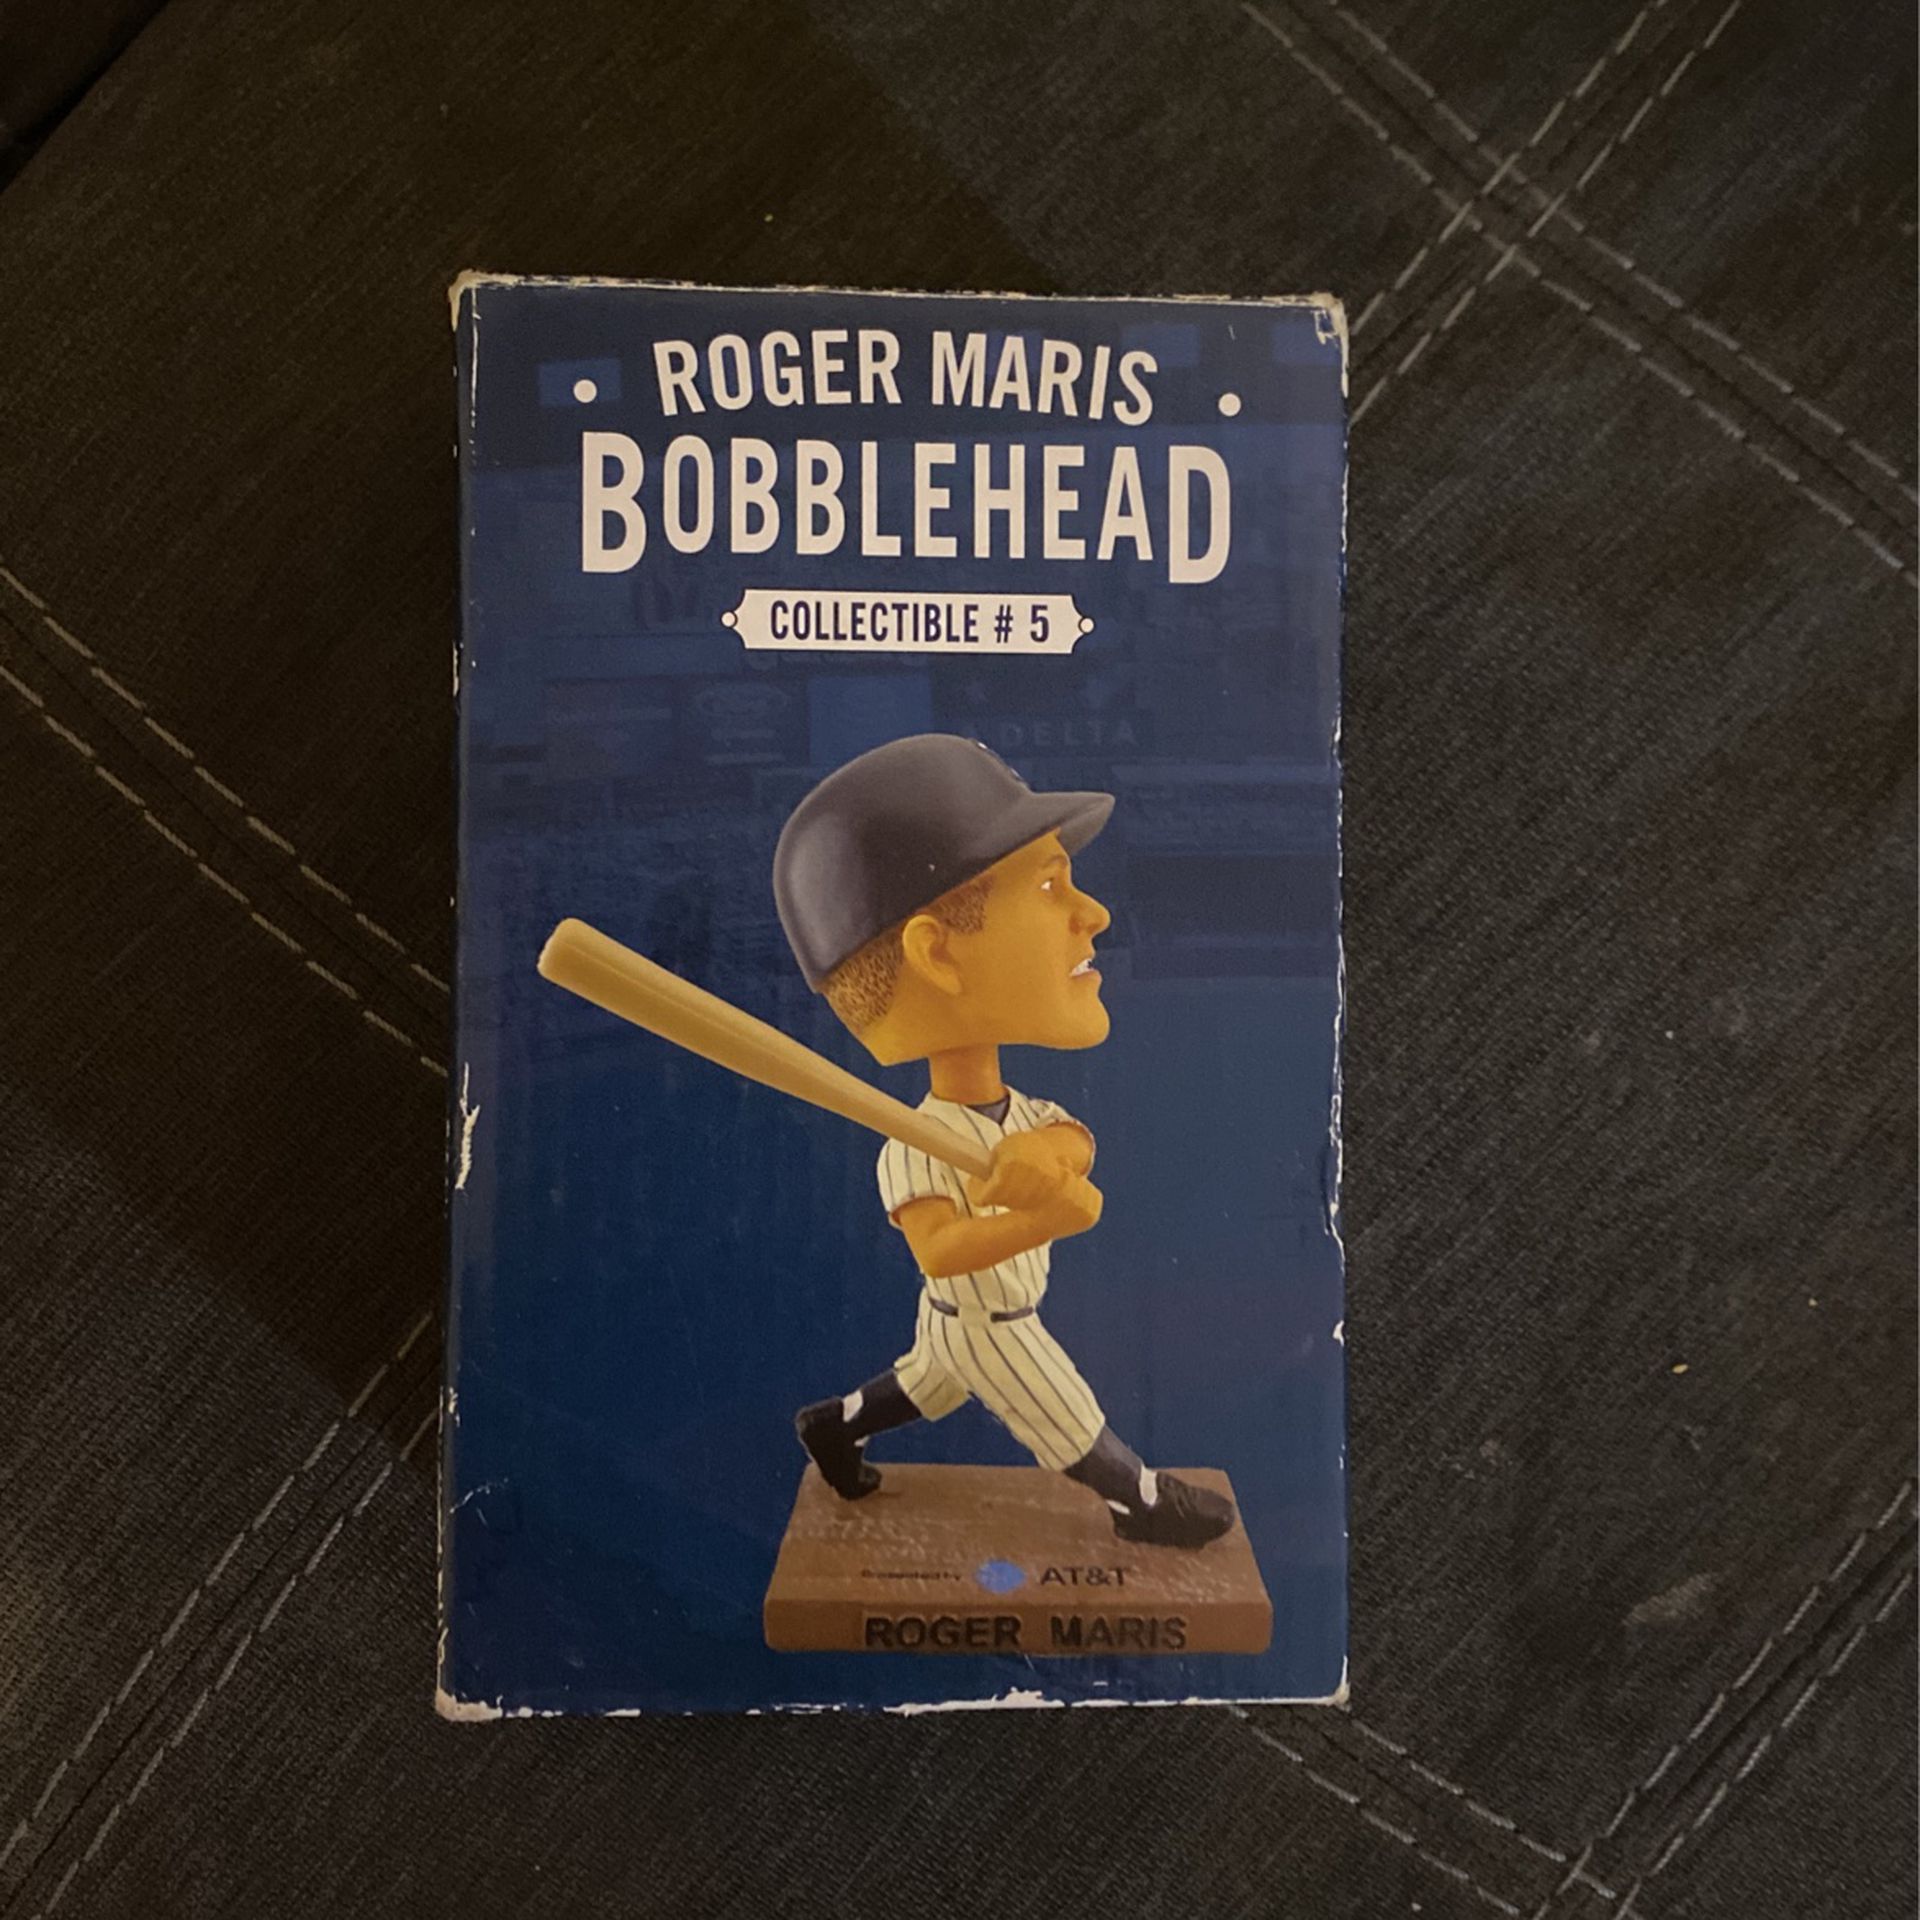 Roger Maris Bobblehead Collection 